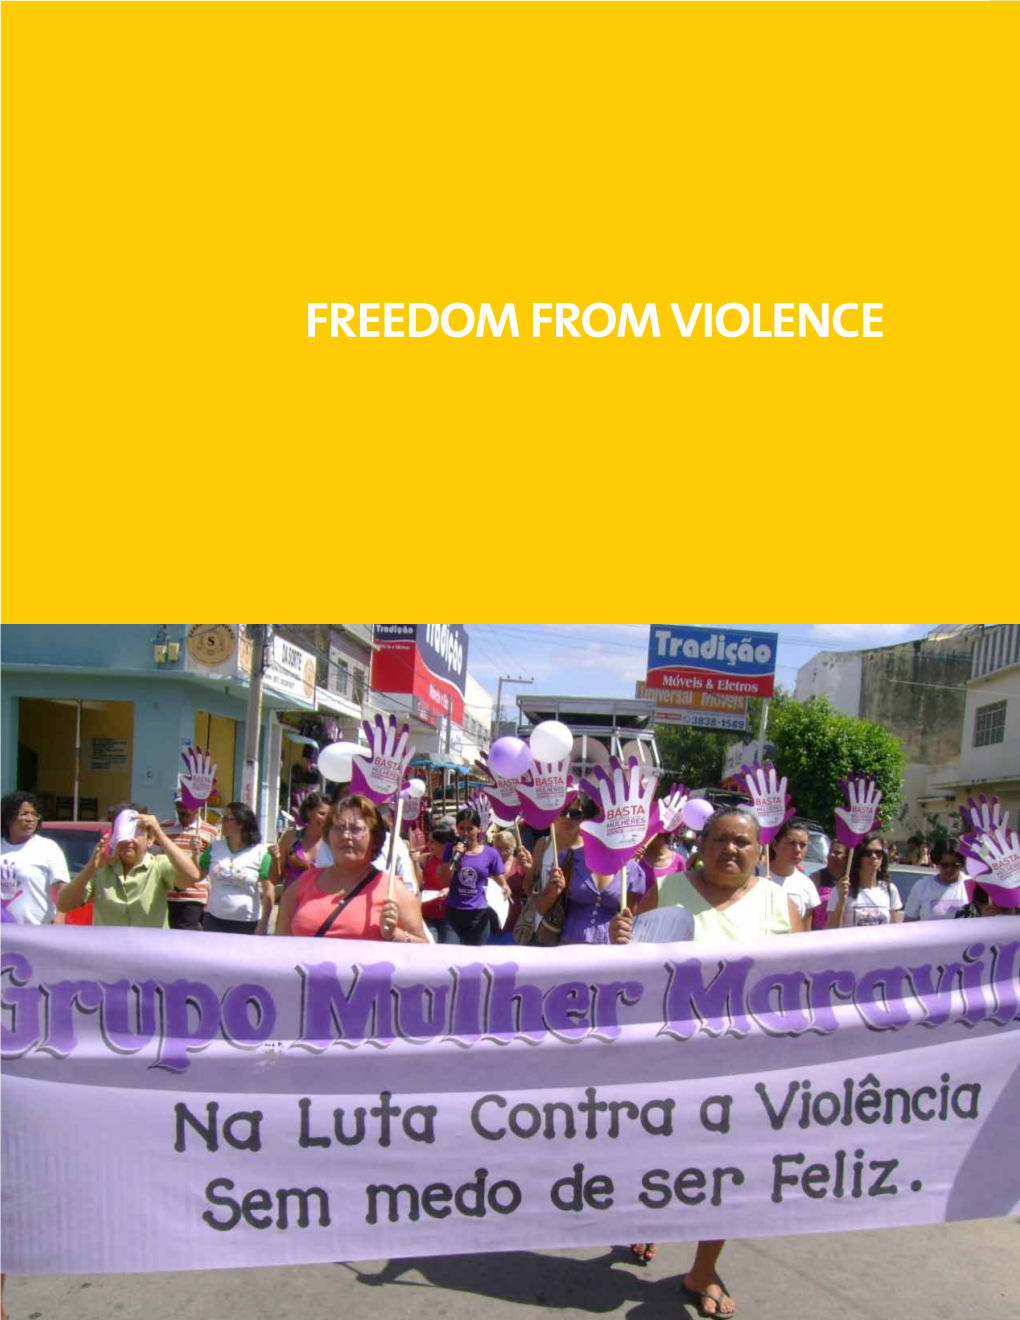 Freedom from Violence